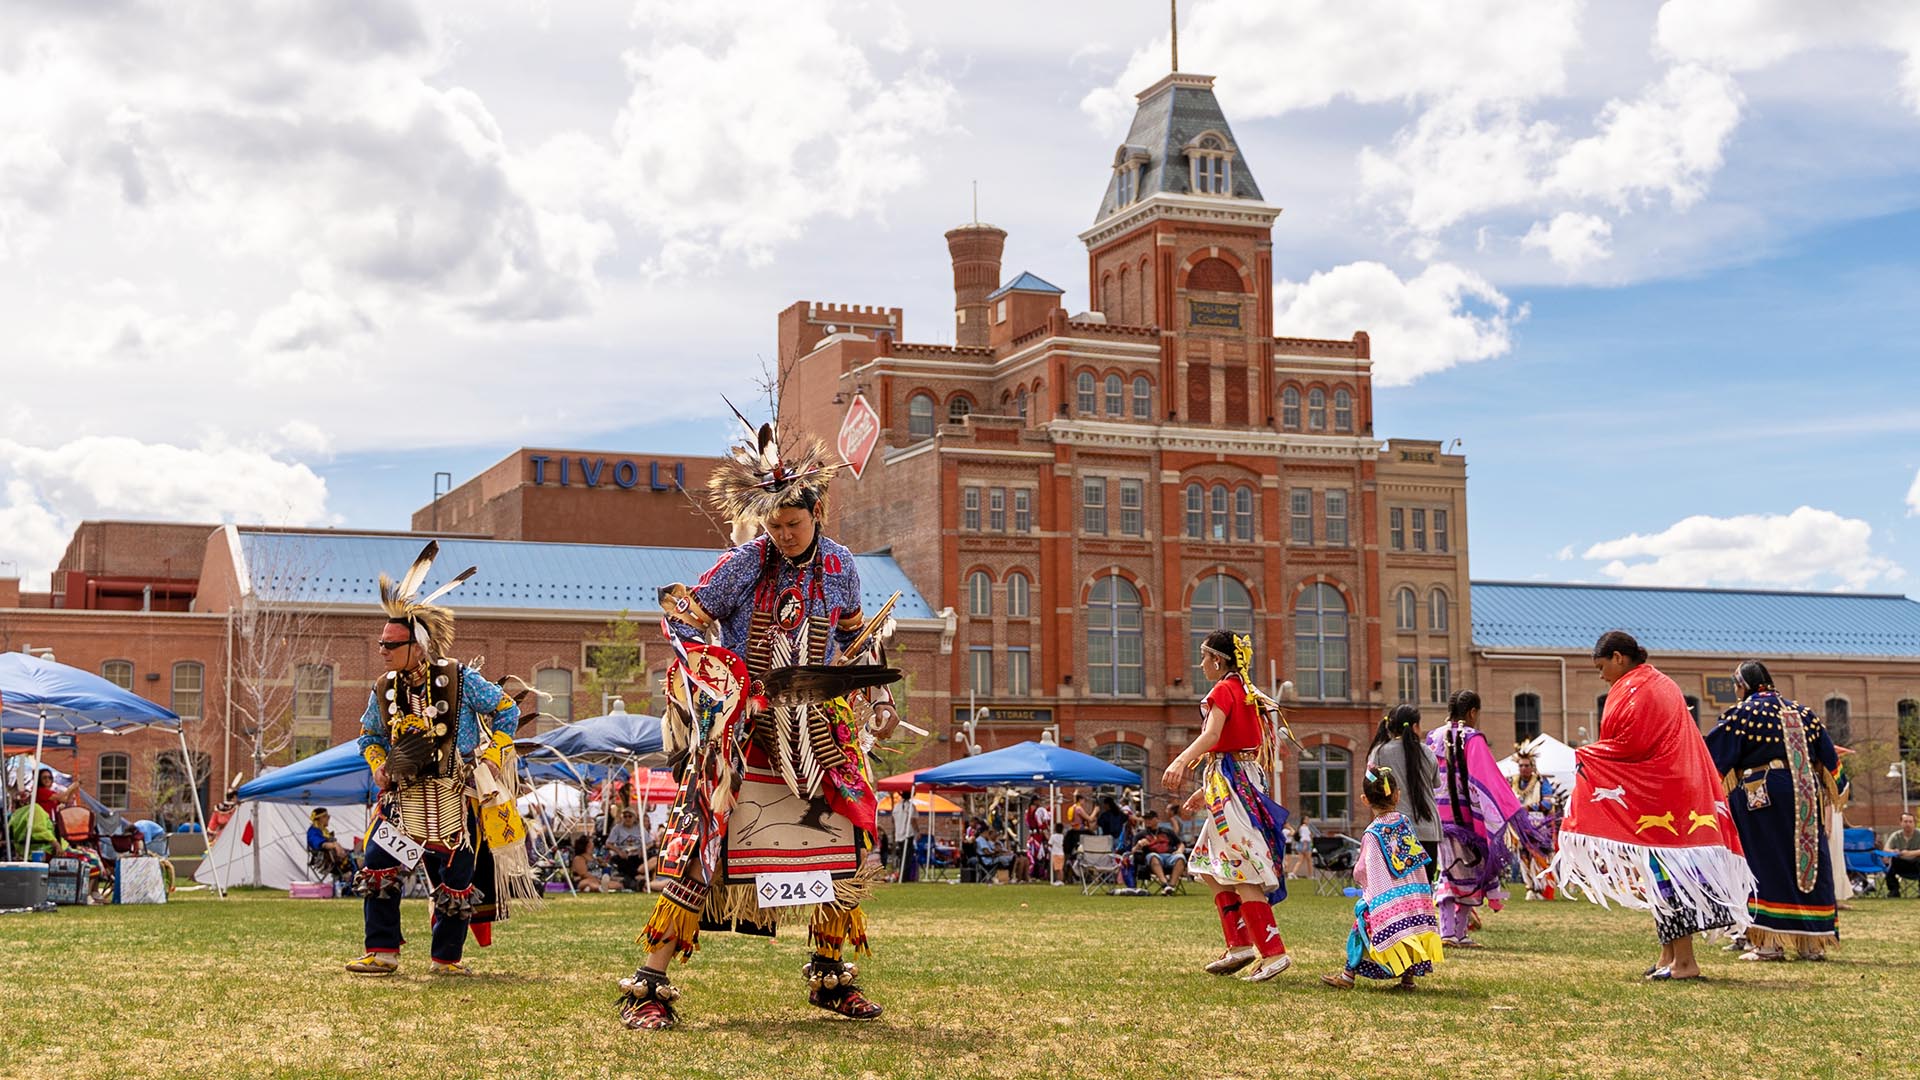 The first annual Auraria Campus Pow wow took place on the Tivoli quad; indigenous students and nation representatives are in dance on the lawn with the Tivoli student union in the background.